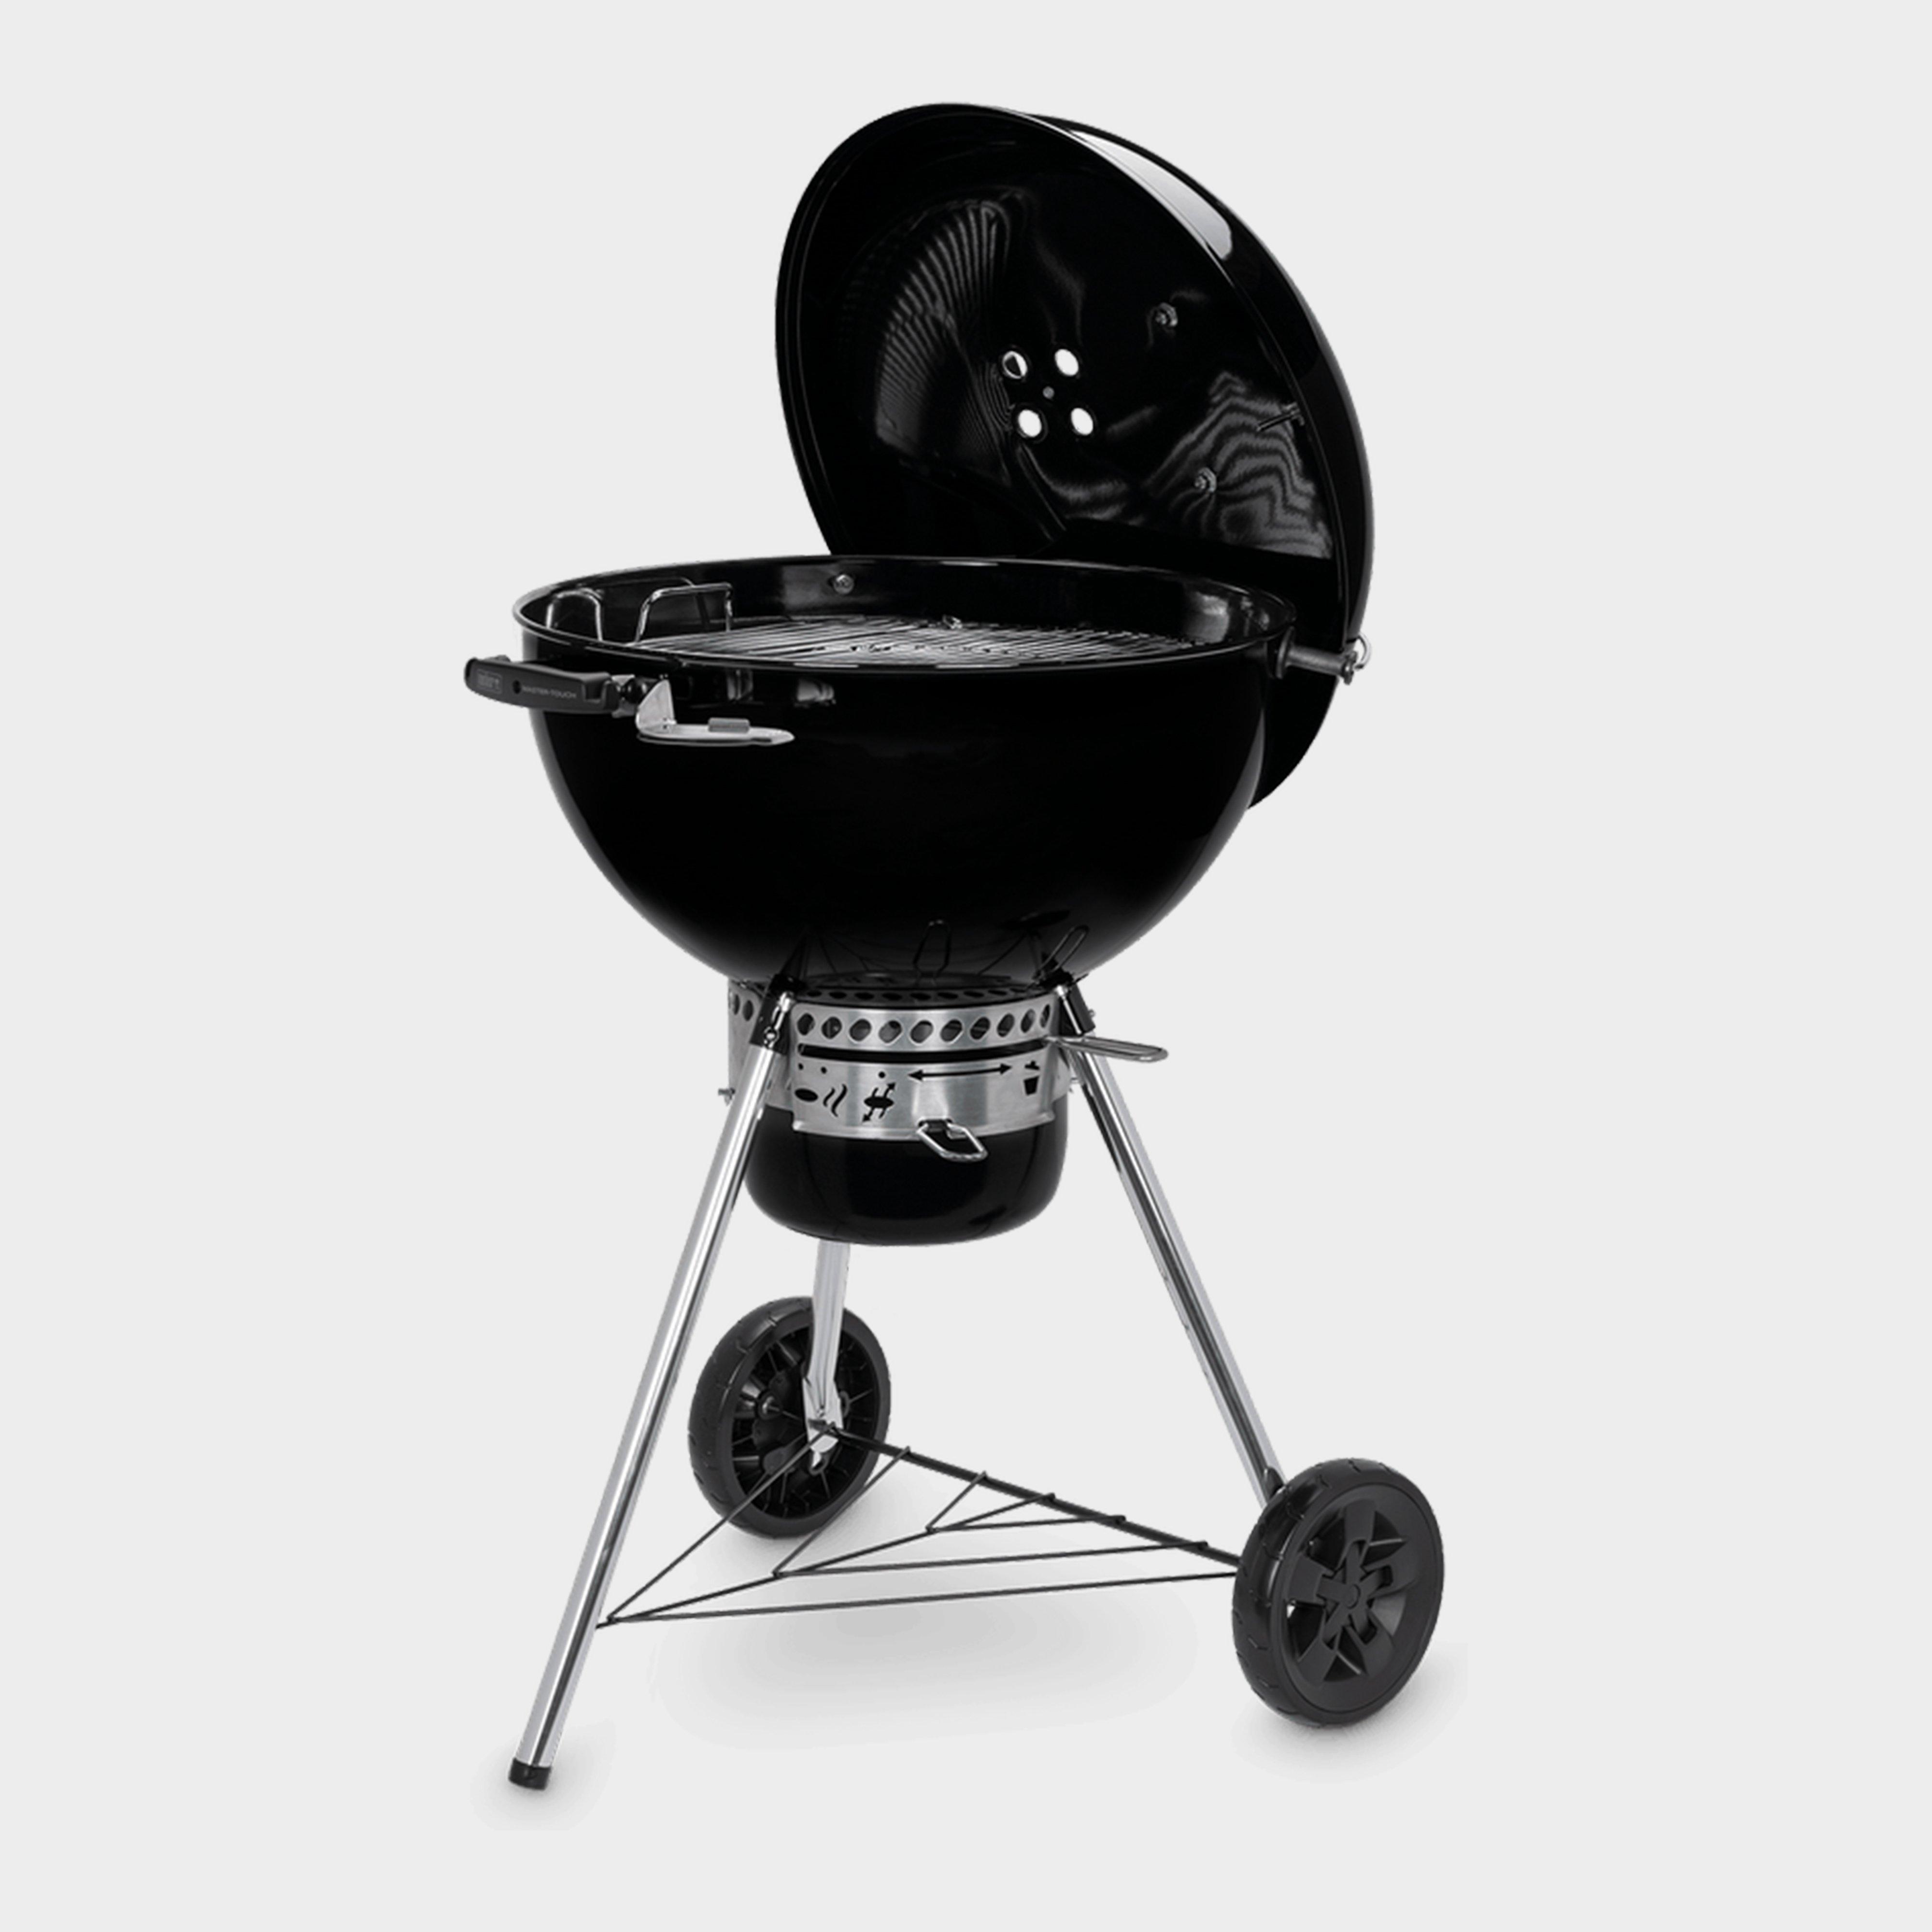 Mastertouch Gbs Charcoal Barbecue - Black, Black